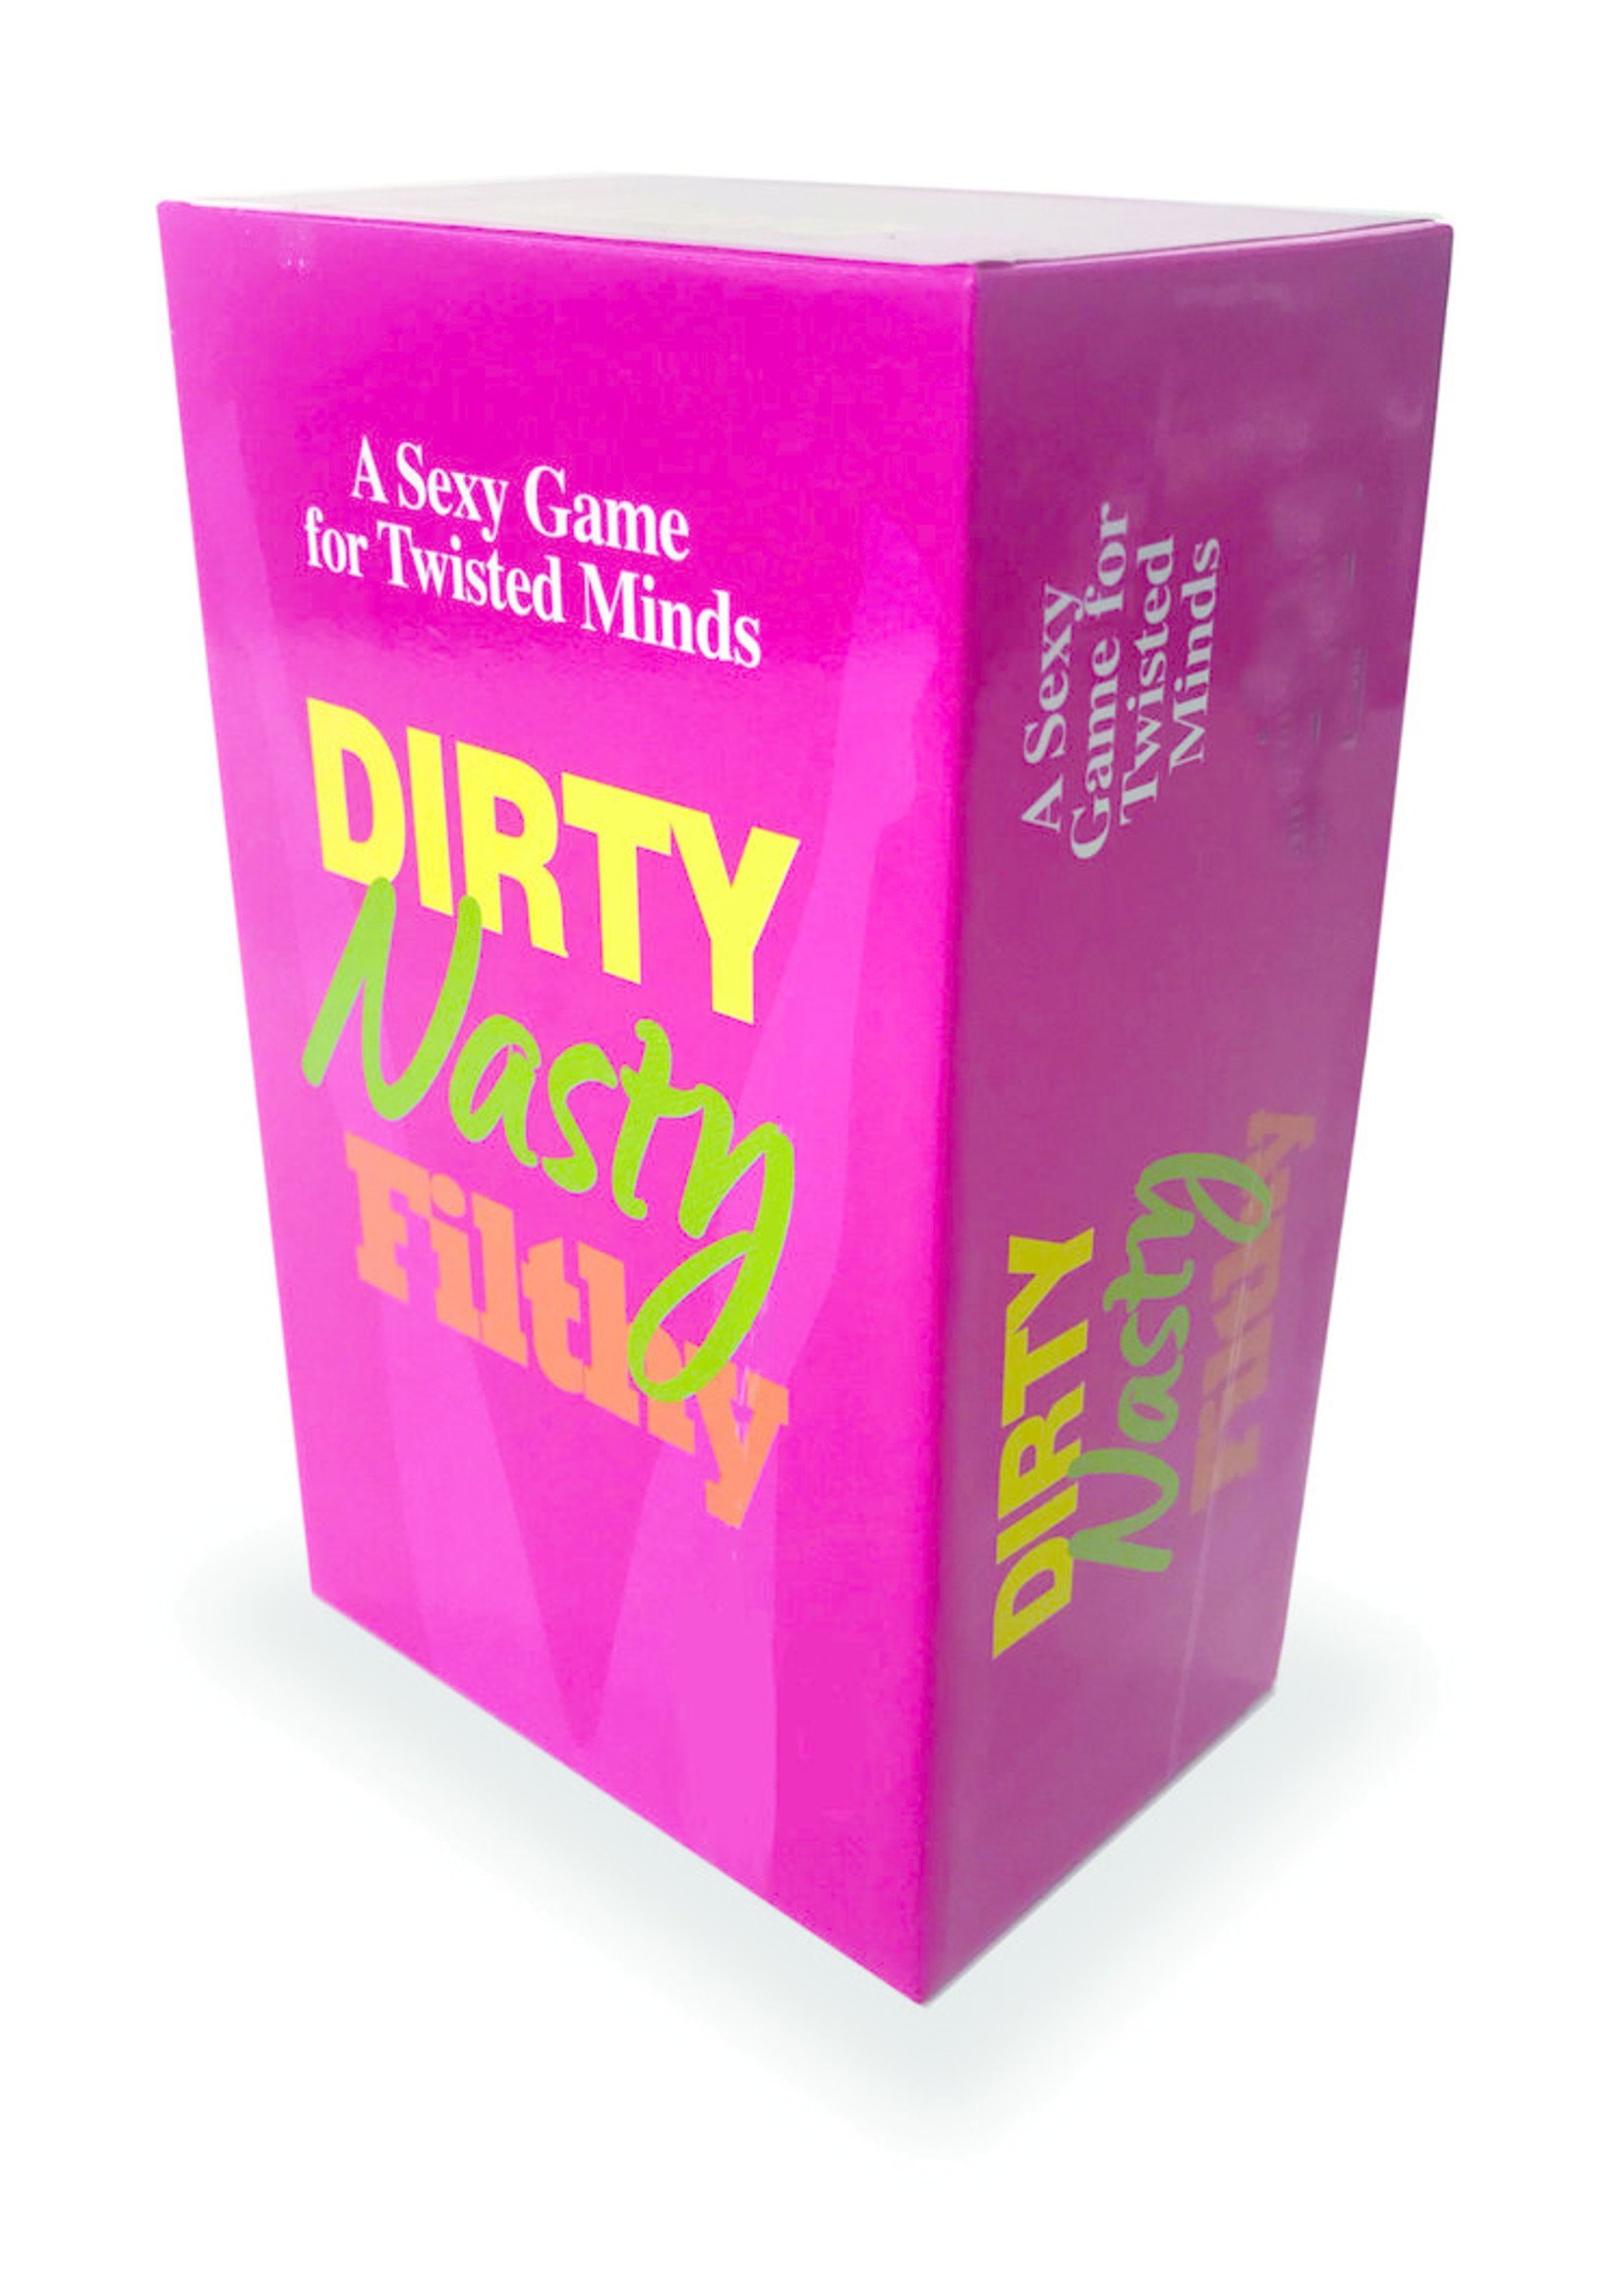 DIRTY NASTY FILTHY GAME